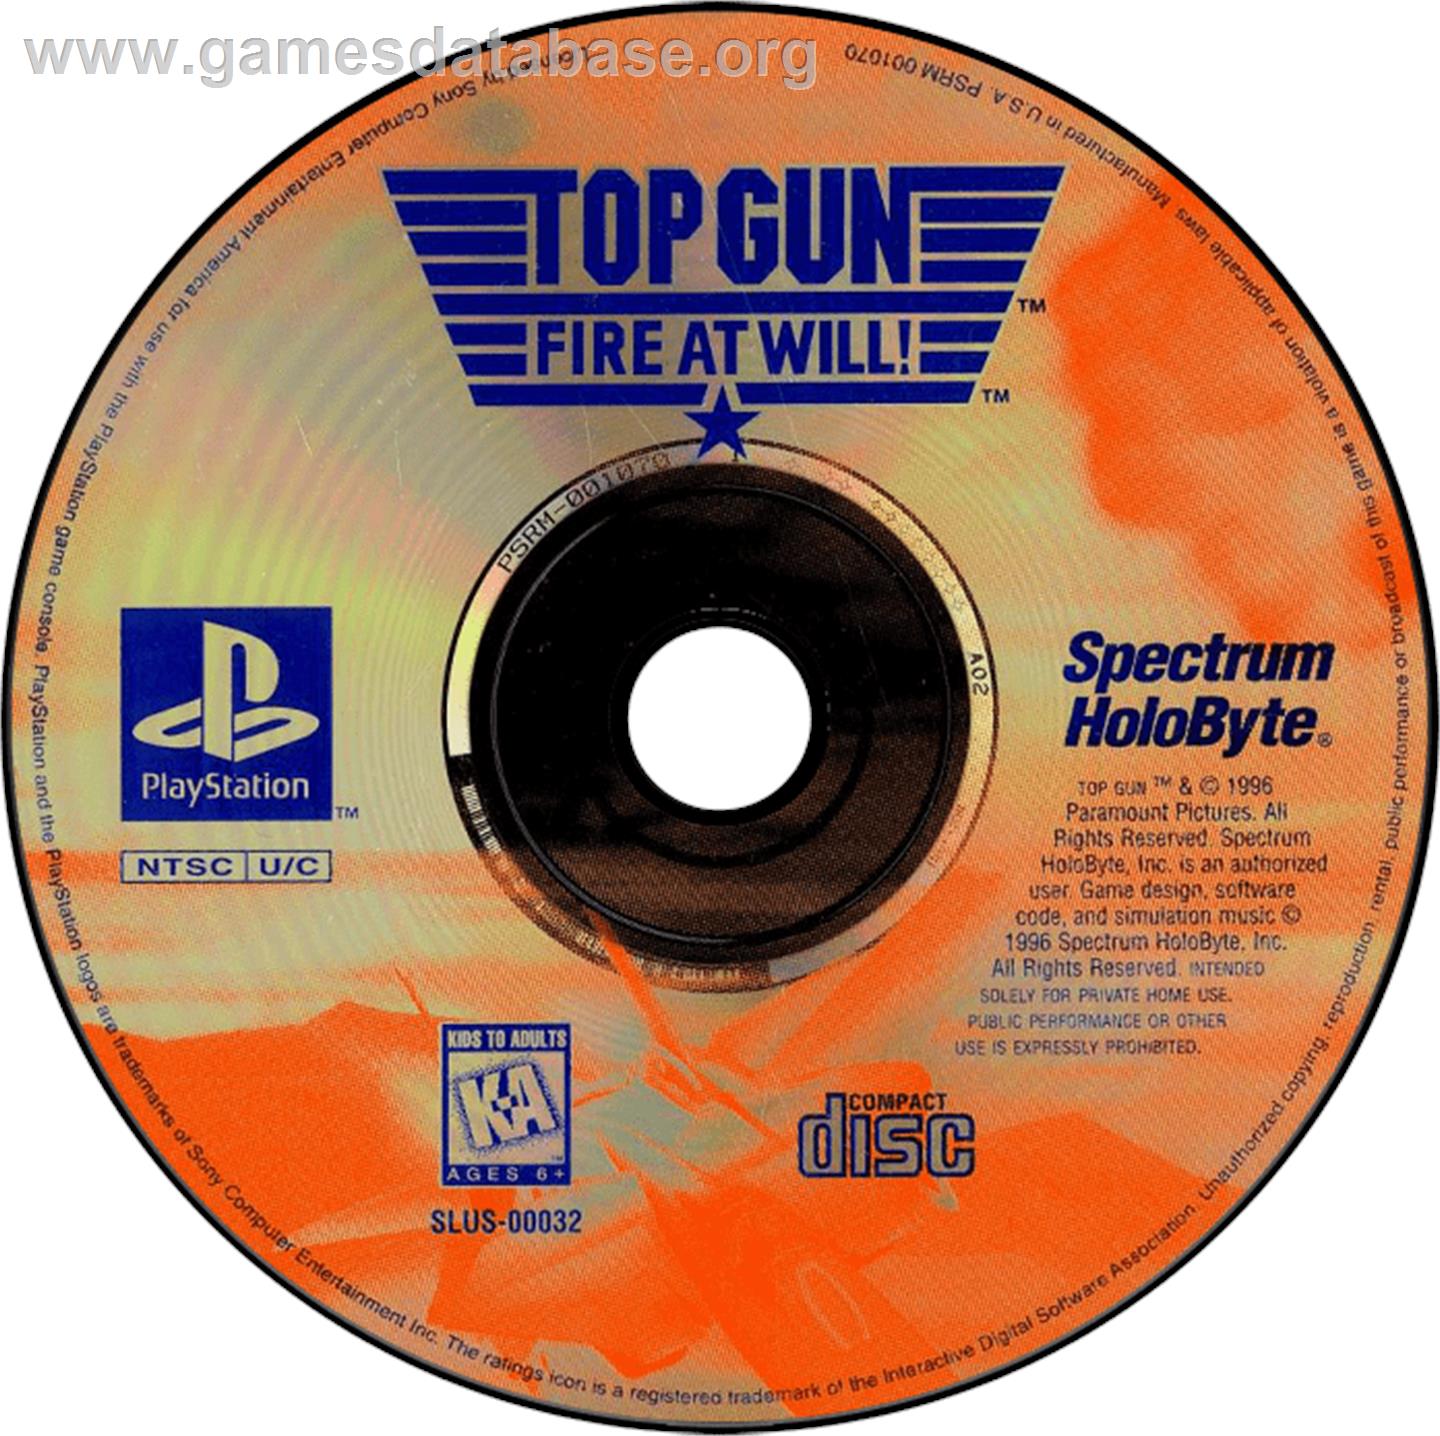 Top Gun: Fire at Will - Sony Playstation - Artwork - Disc